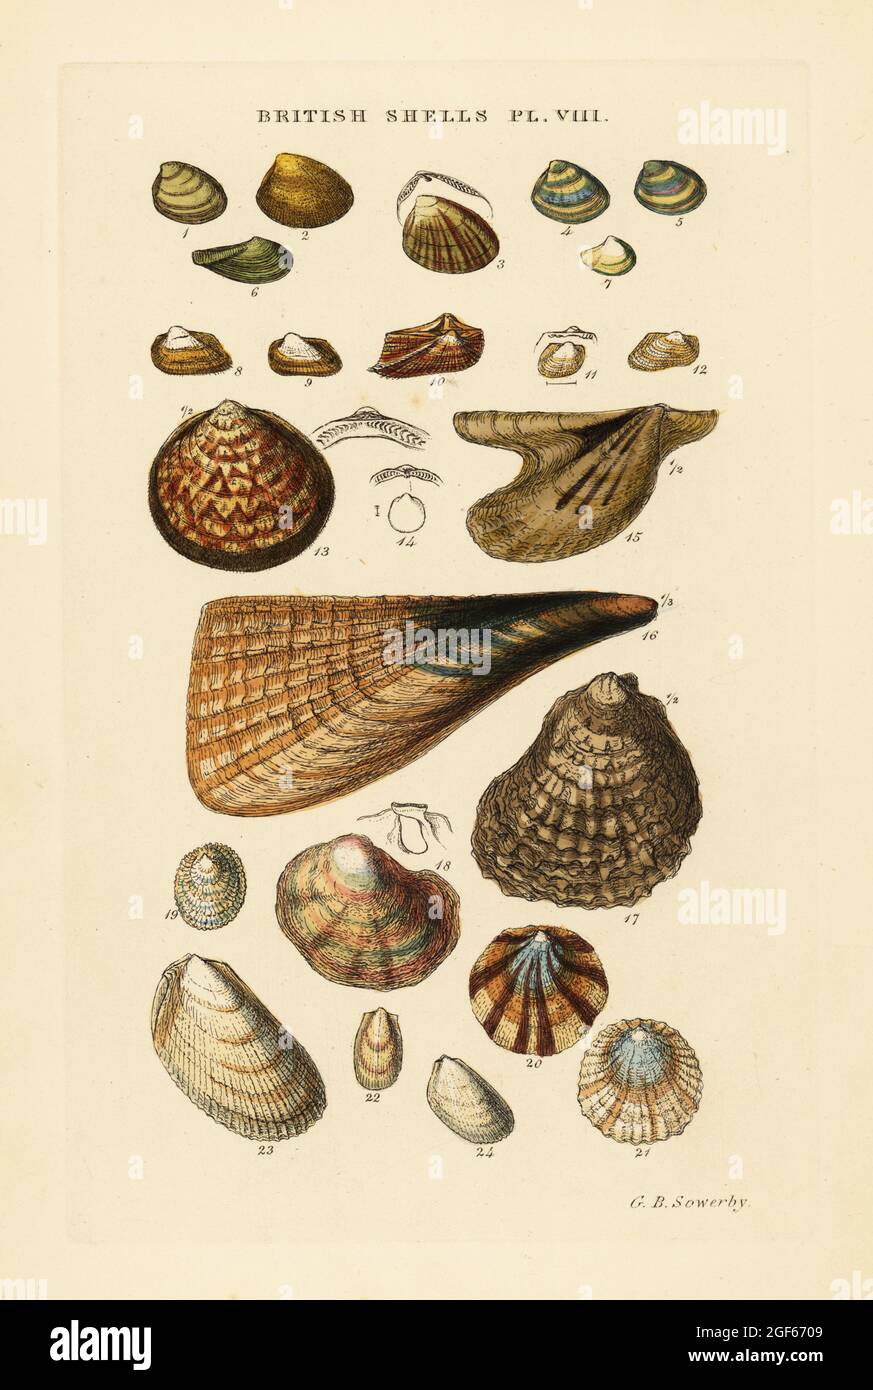 Oyster, Ostrea vulgaris, pen shell, Pinna pectinata, and Nucula, Arca, Lima, Anomia, etc. Handcoloured copperplate engraving by George Brettingham Sowerby from his own Illustrated Index of British Shells, Sowerby and Simpkin, Marshall & Co., London, 1859. George Brettingham Sowerby II (1812-1884), British naturalist, illustrator, and conchologist. Stock Photo